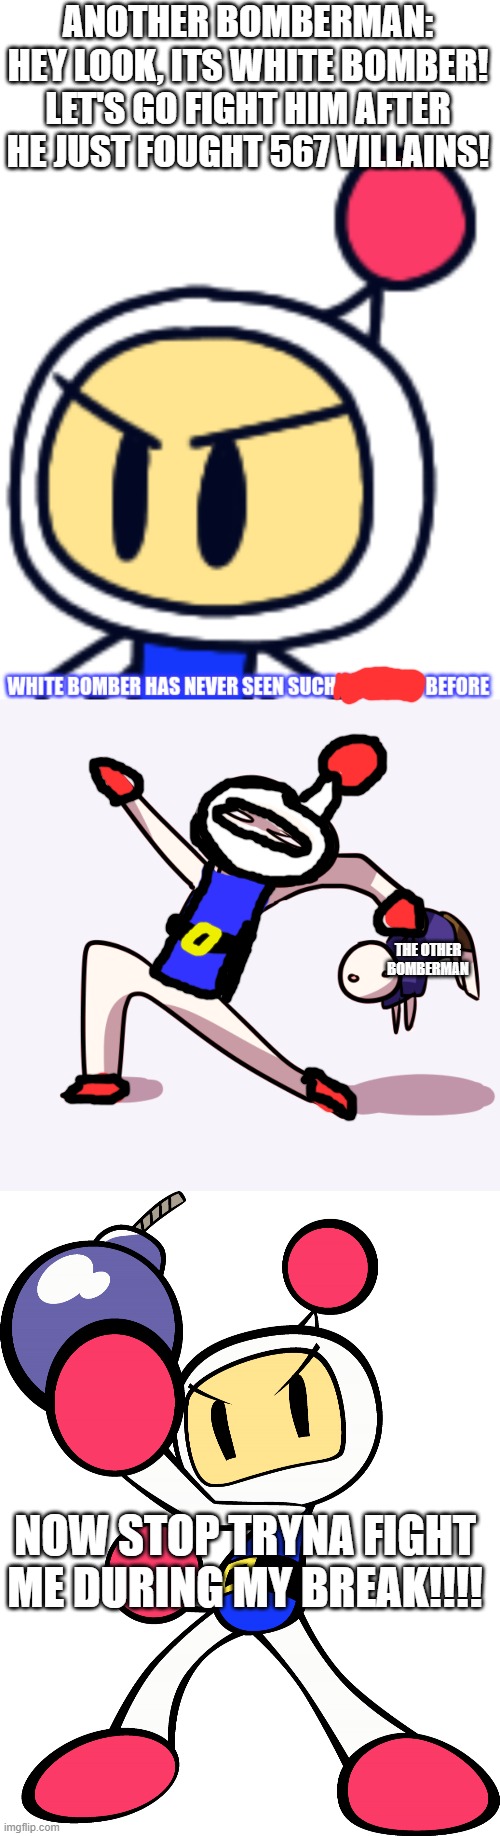 DO NOT FIGHT WHITE BOMBER DURING HIS BREAK!!!!! | ANOTHER BOMBERMAN: HEY LOOK, ITS WHITE BOMBER! LET'S GO FIGHT HIM AFTER HE JUST FOUGHT 567 VILLAINS! THE OTHER BOMBERMAN; NOW STOP TRYNA FIGHT ME DURING MY BREAK!!!! | image tagged in white bomber has never seen such bullshit before,yeet single frame high quality,white bomber super bomberman r,bomberman | made w/ Imgflip meme maker